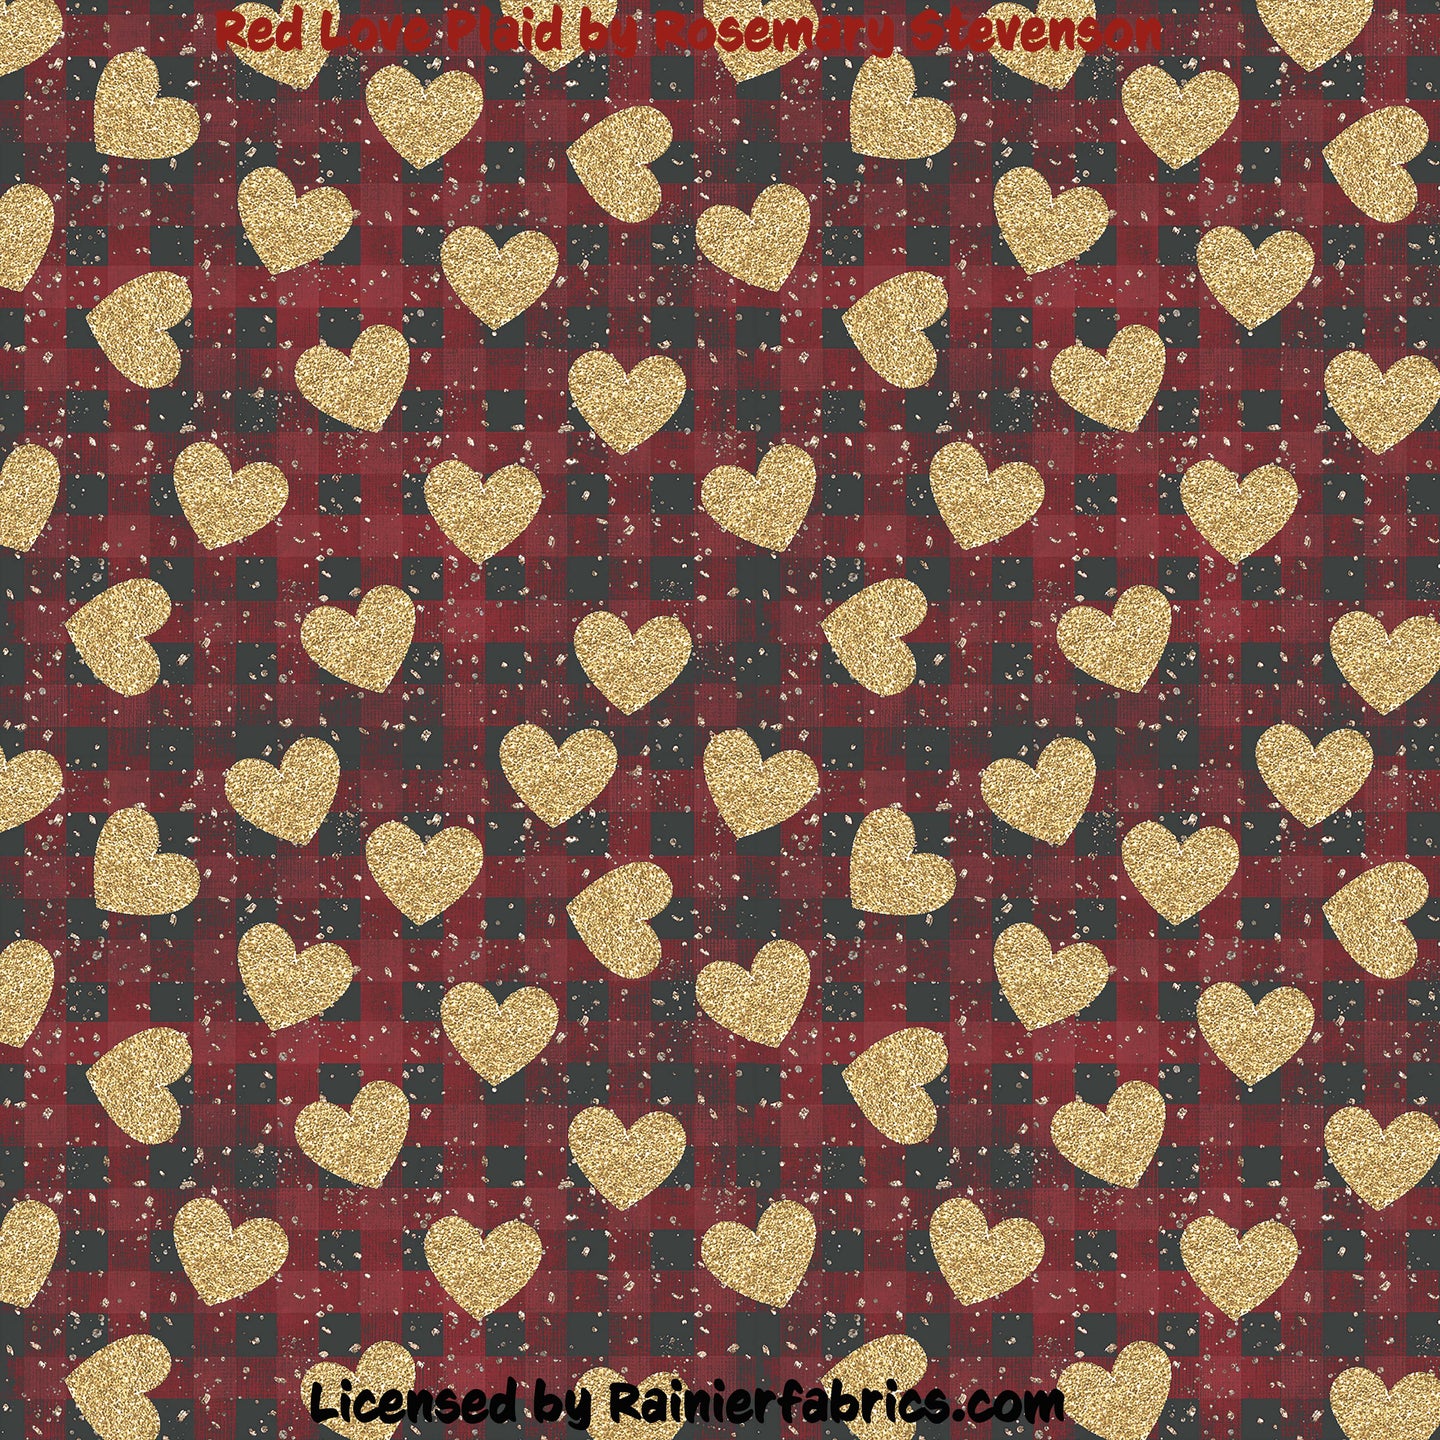 Red Love Plaid by Rosemary Stevenson - 2-5 day turnaround - Order by 1/2 yard; Description of bases below